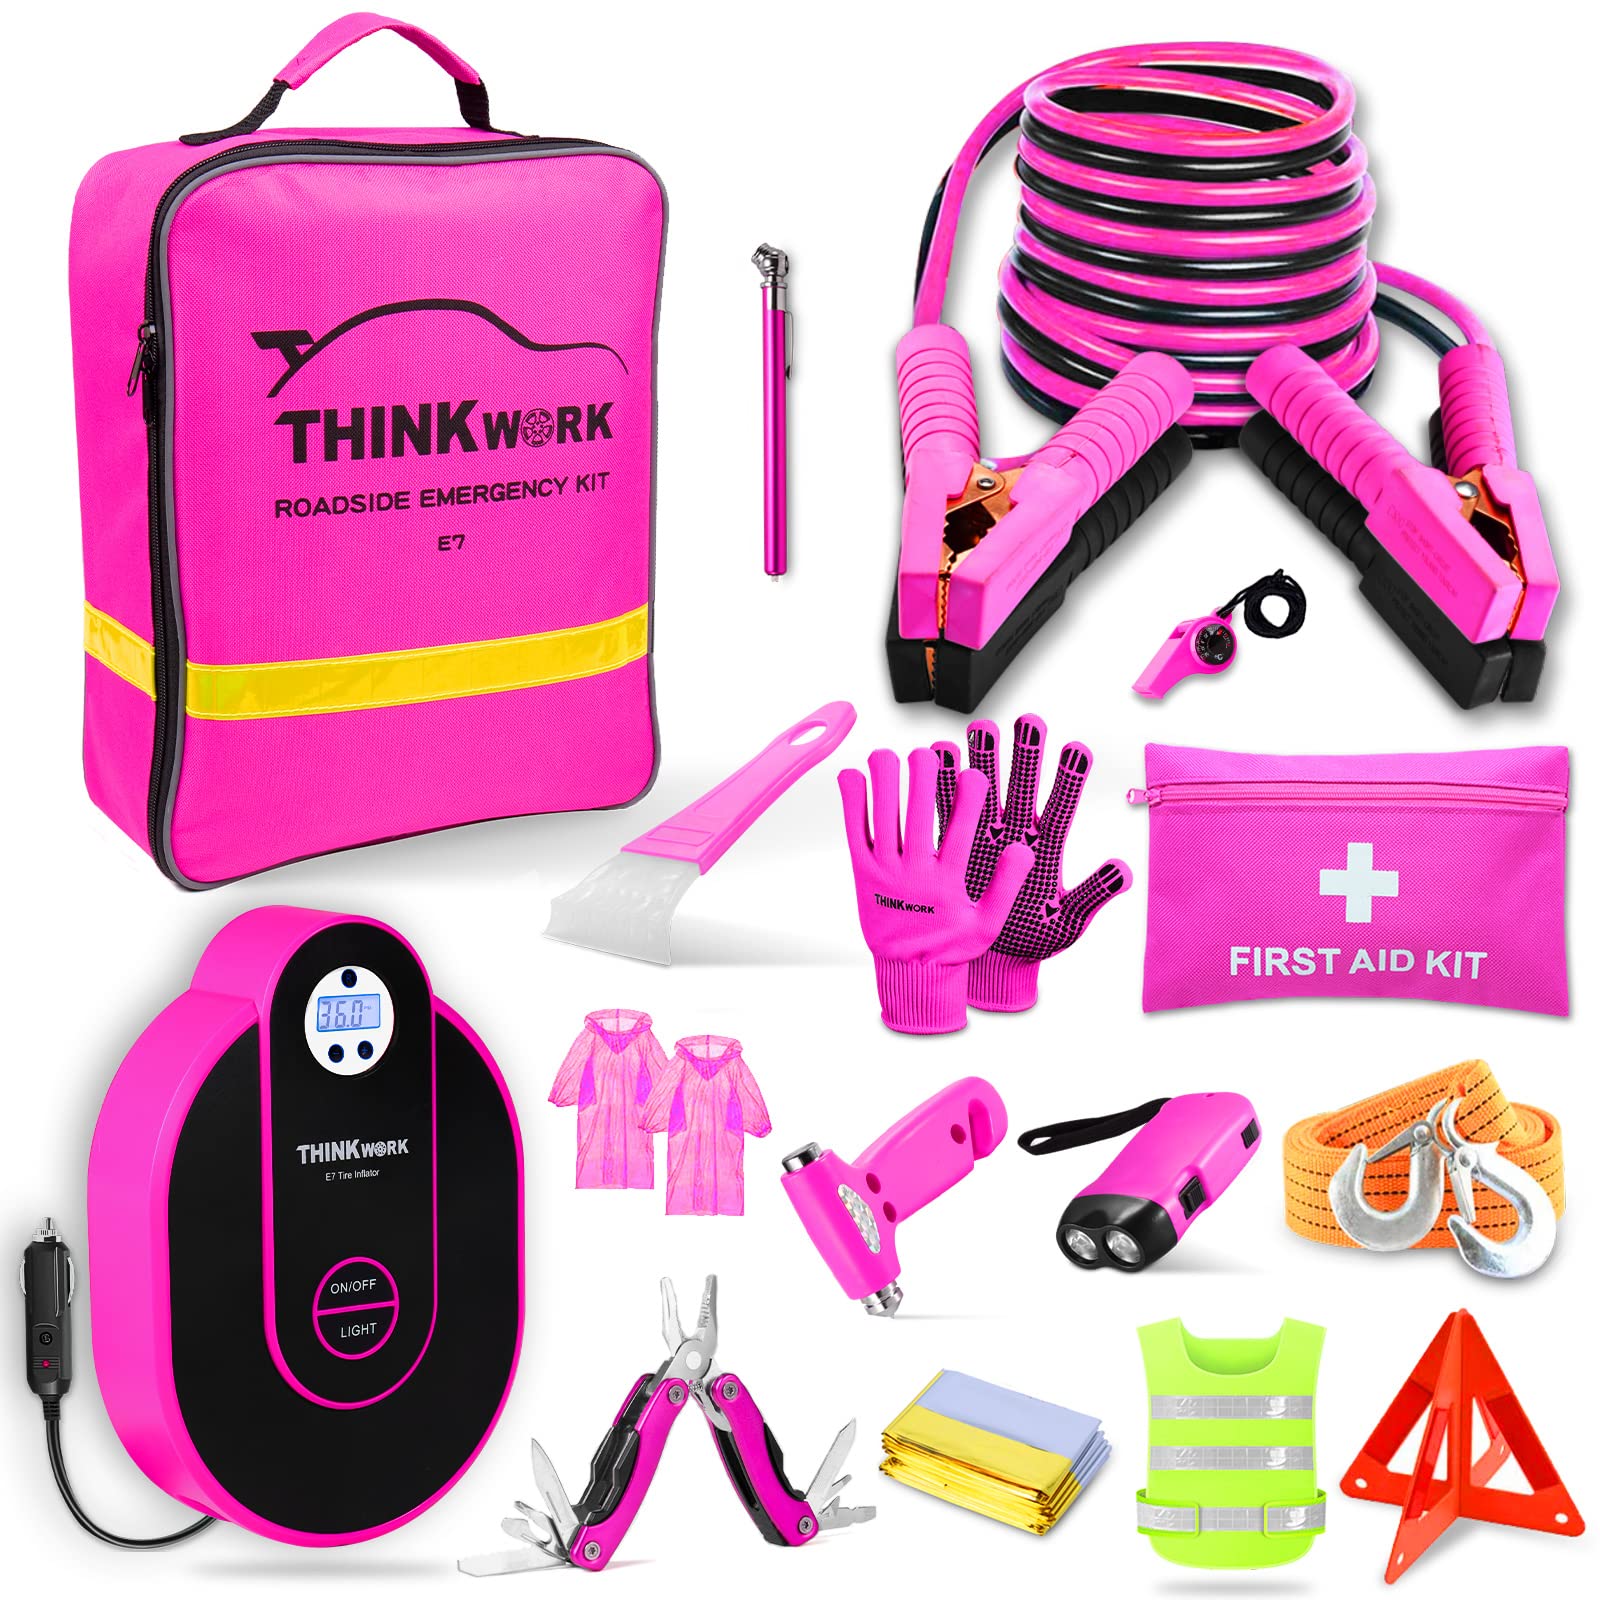 Thinkwork Car Emergency Kit For Teen Girl And Ladys Gifts, Pink Emergency Roadside Assistance Kit With Digital Air Compressor, 1